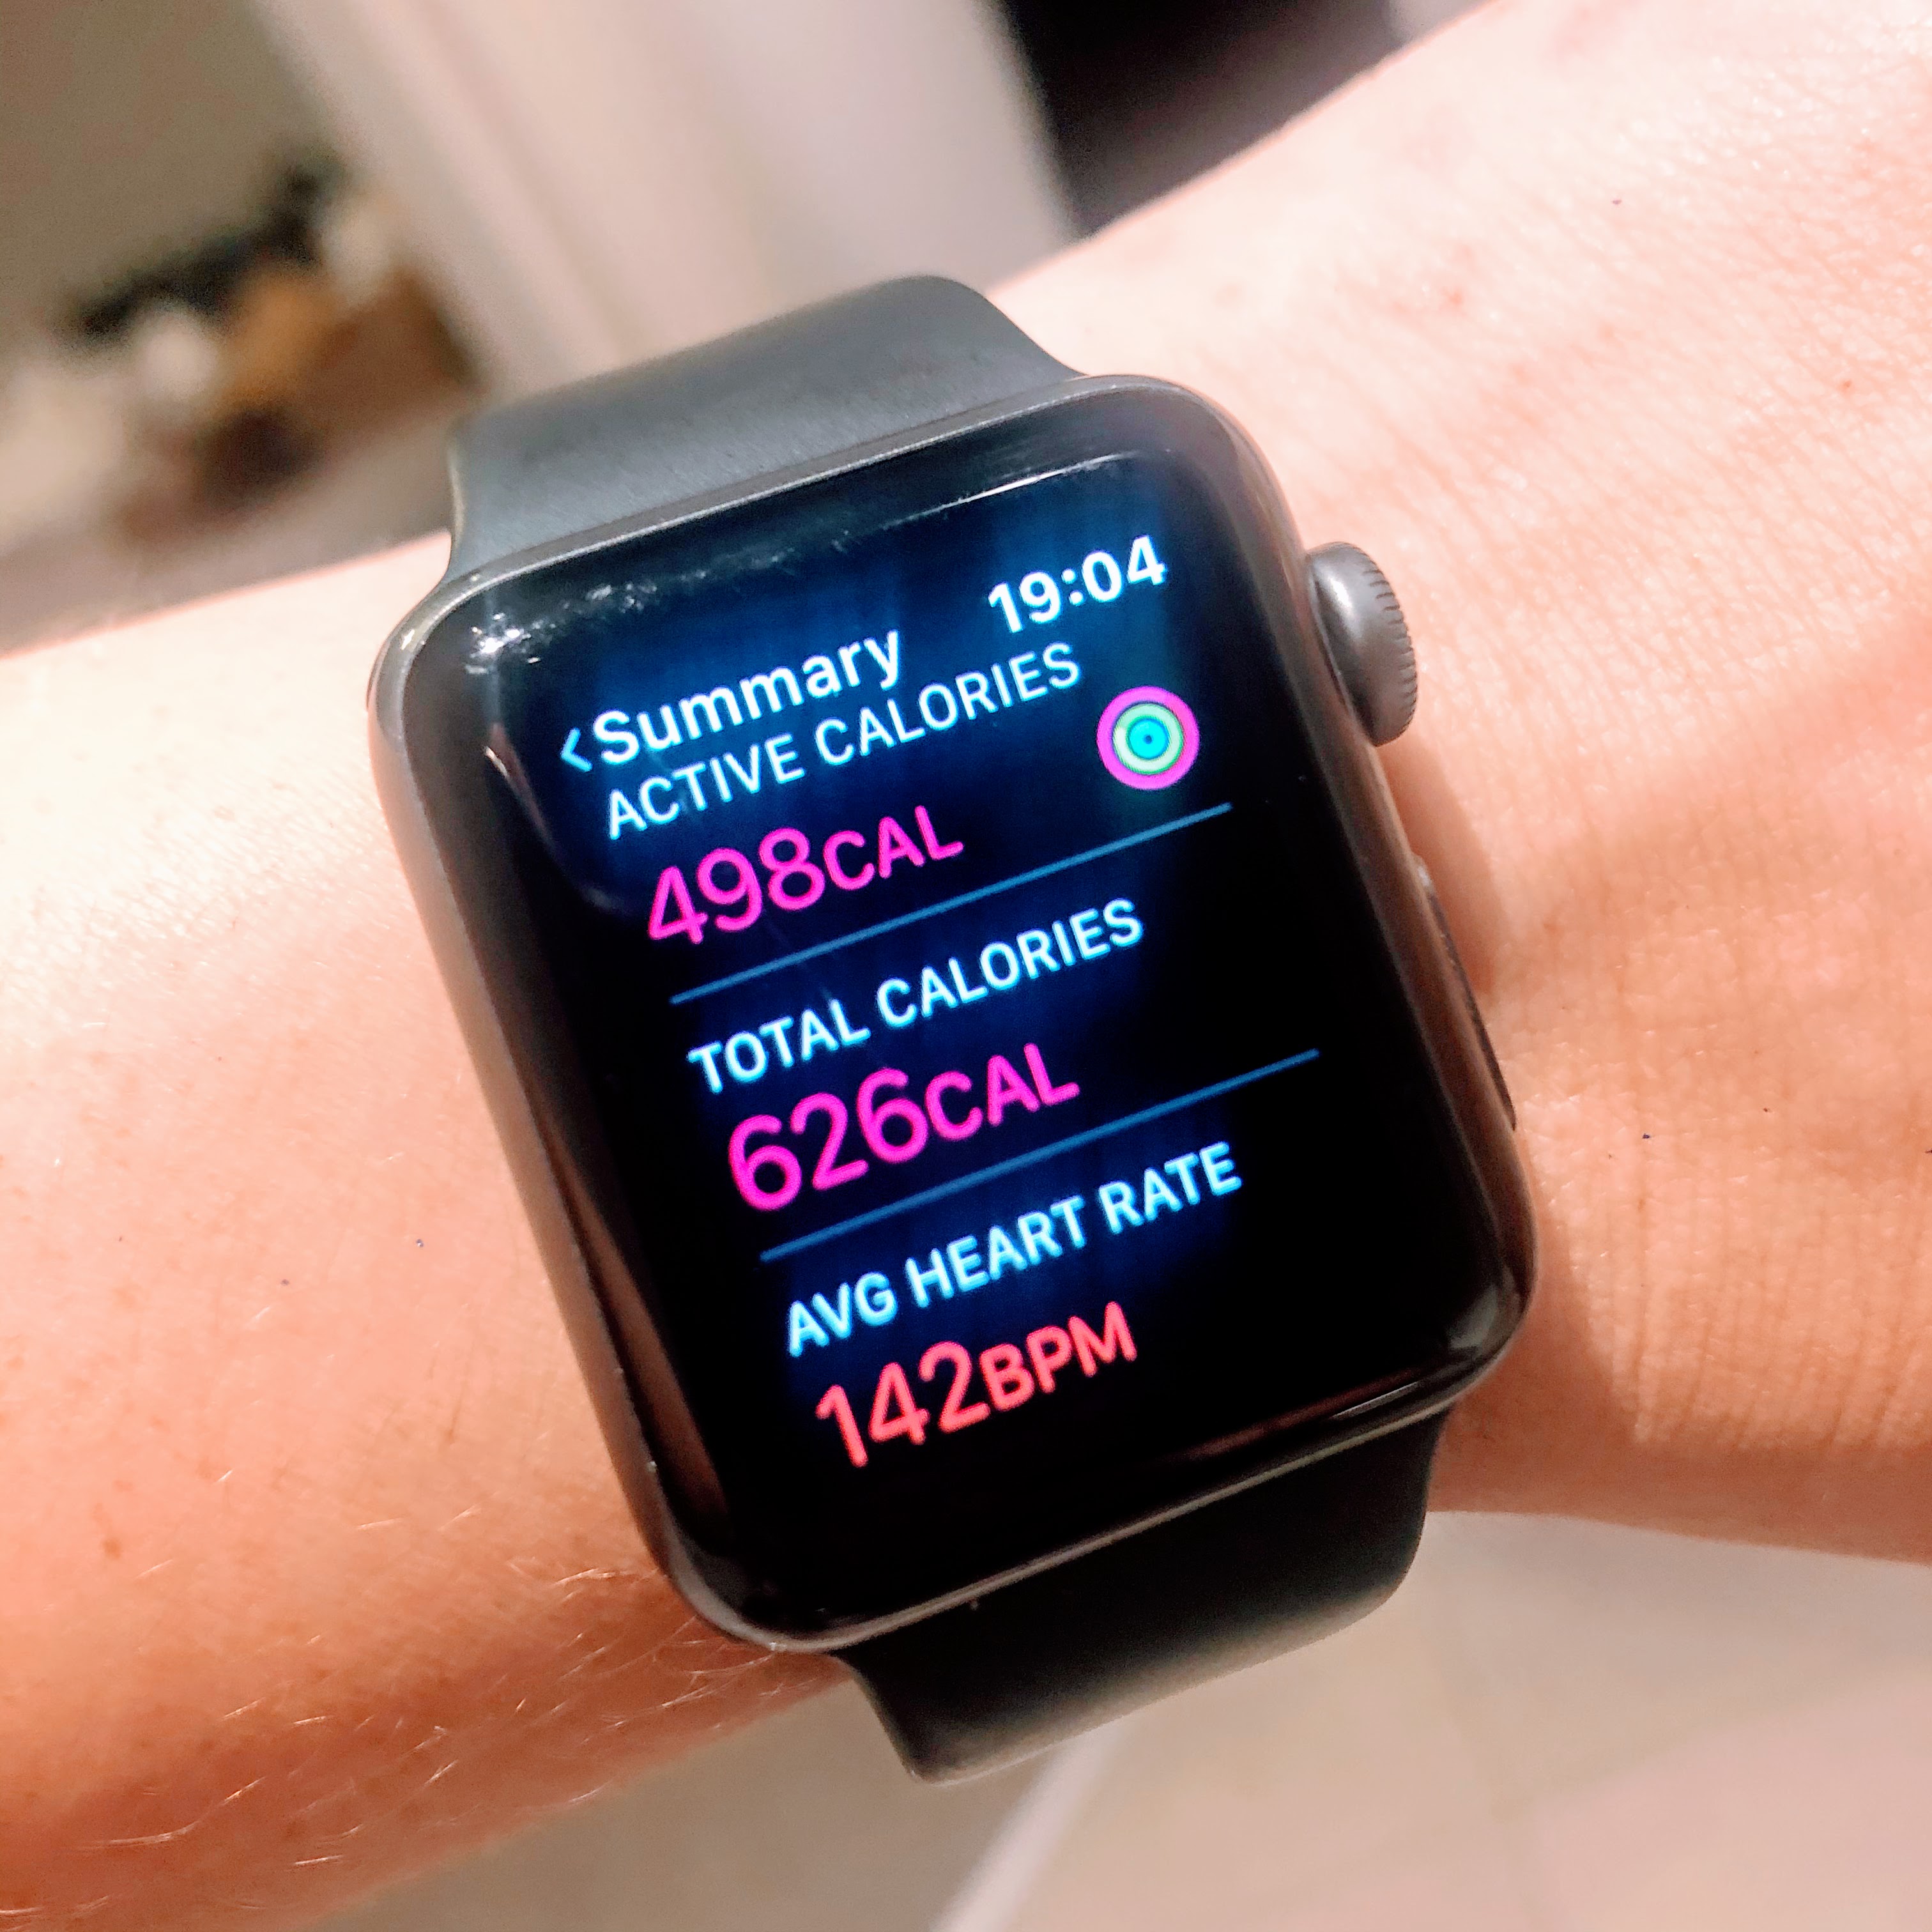 Workout activity on apple watch